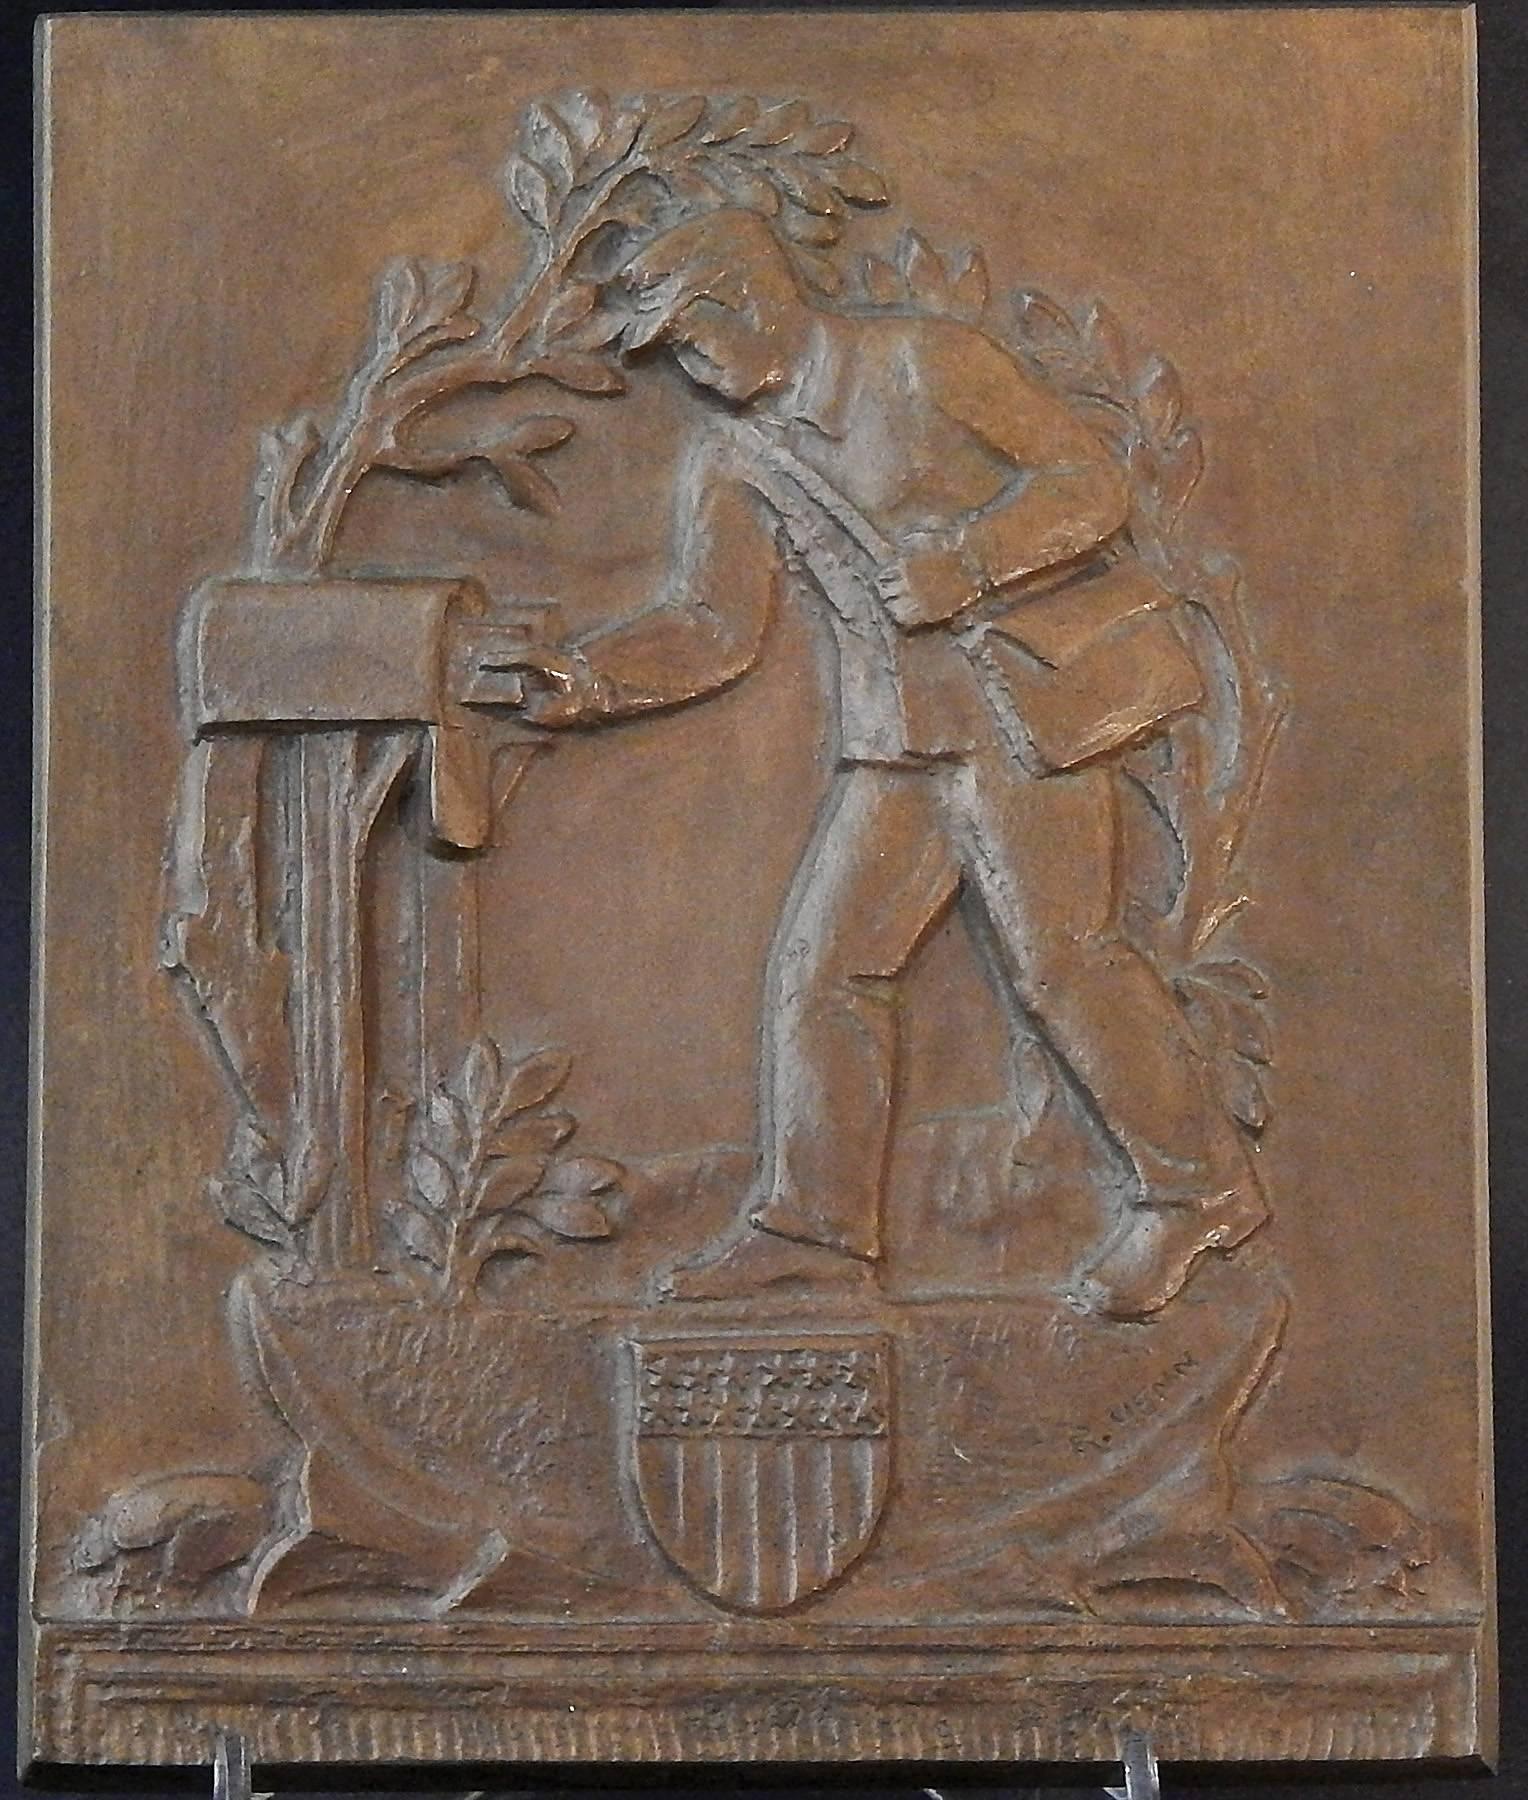 This rare and important pairing of plaster maquette and bronze panel, sculpted in preparation for a WPA bas relief at the post office in Loudonville, Ohio, was created by Rudolf Henn in 1938. Henn was a respected and successful sculptor in Germany